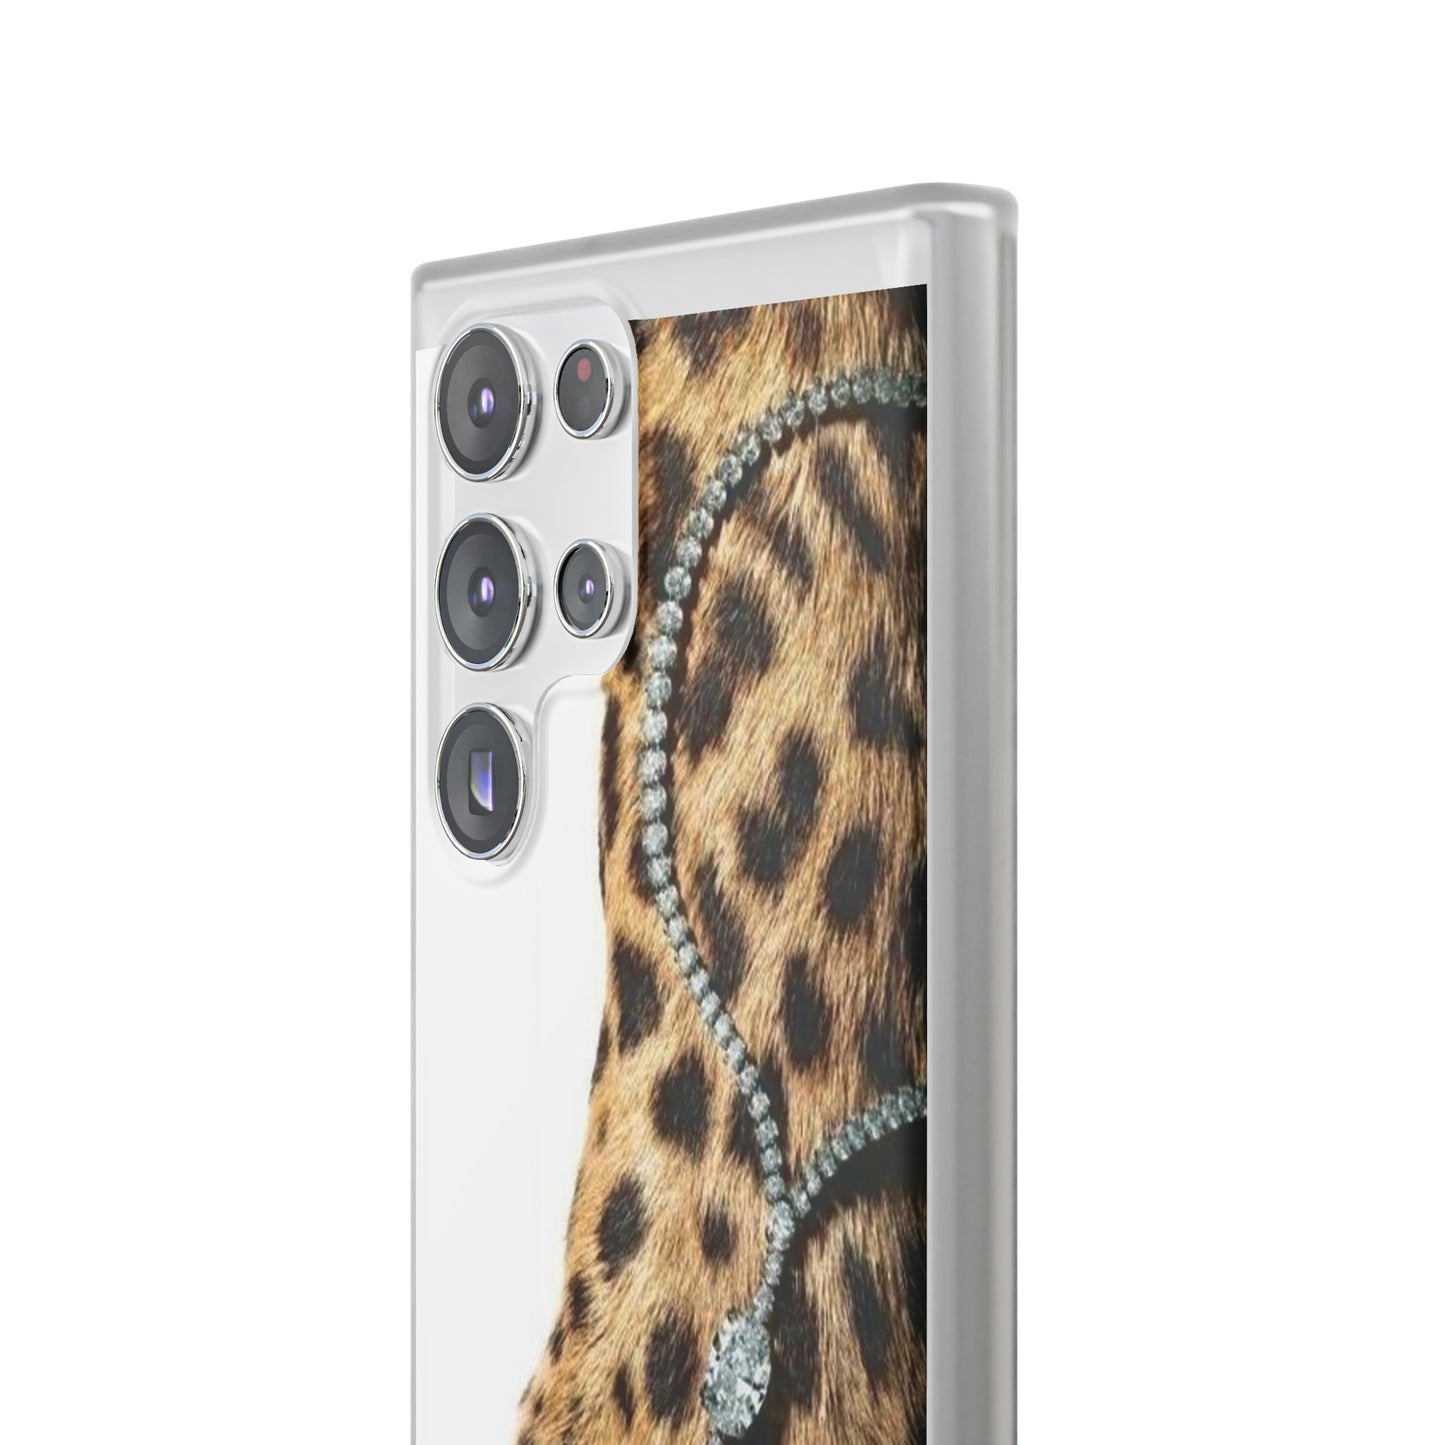 Leopard Claw Case